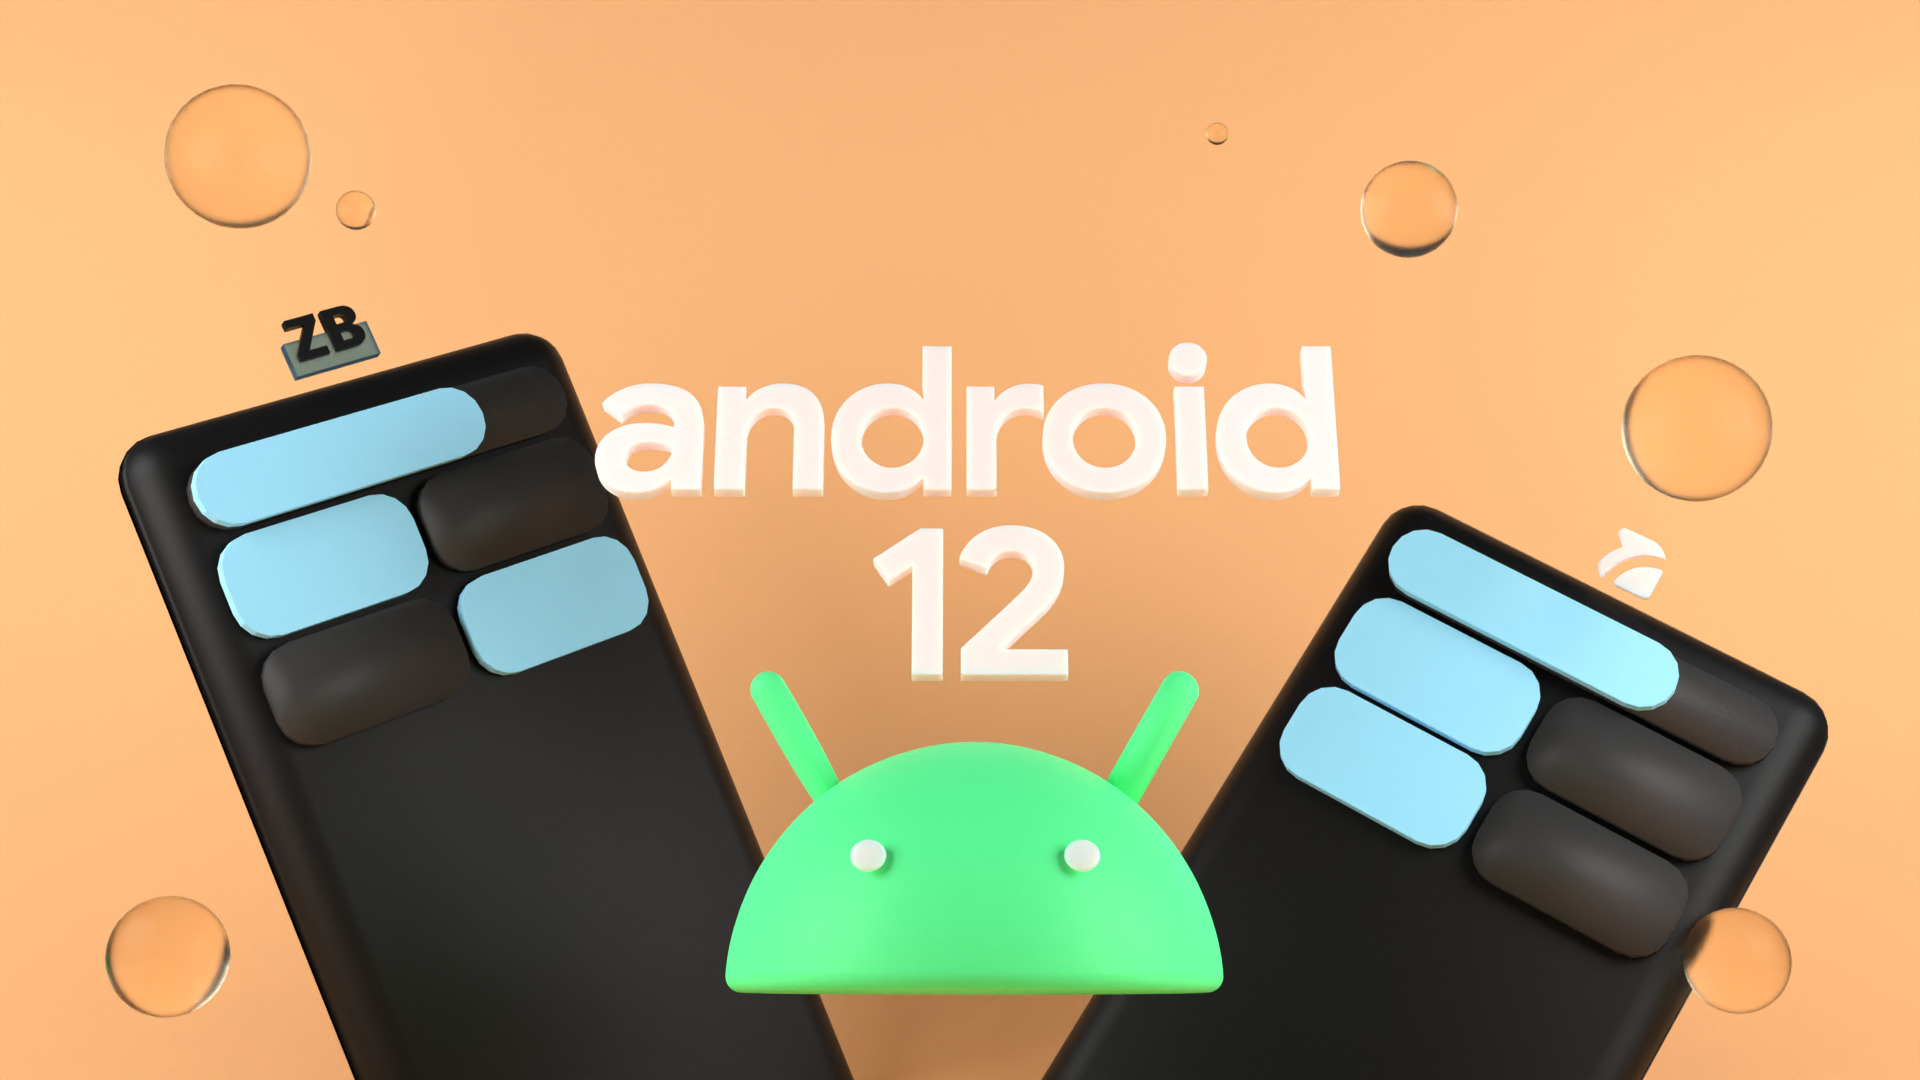 3D Recreation of Android 12 UI made with Blender